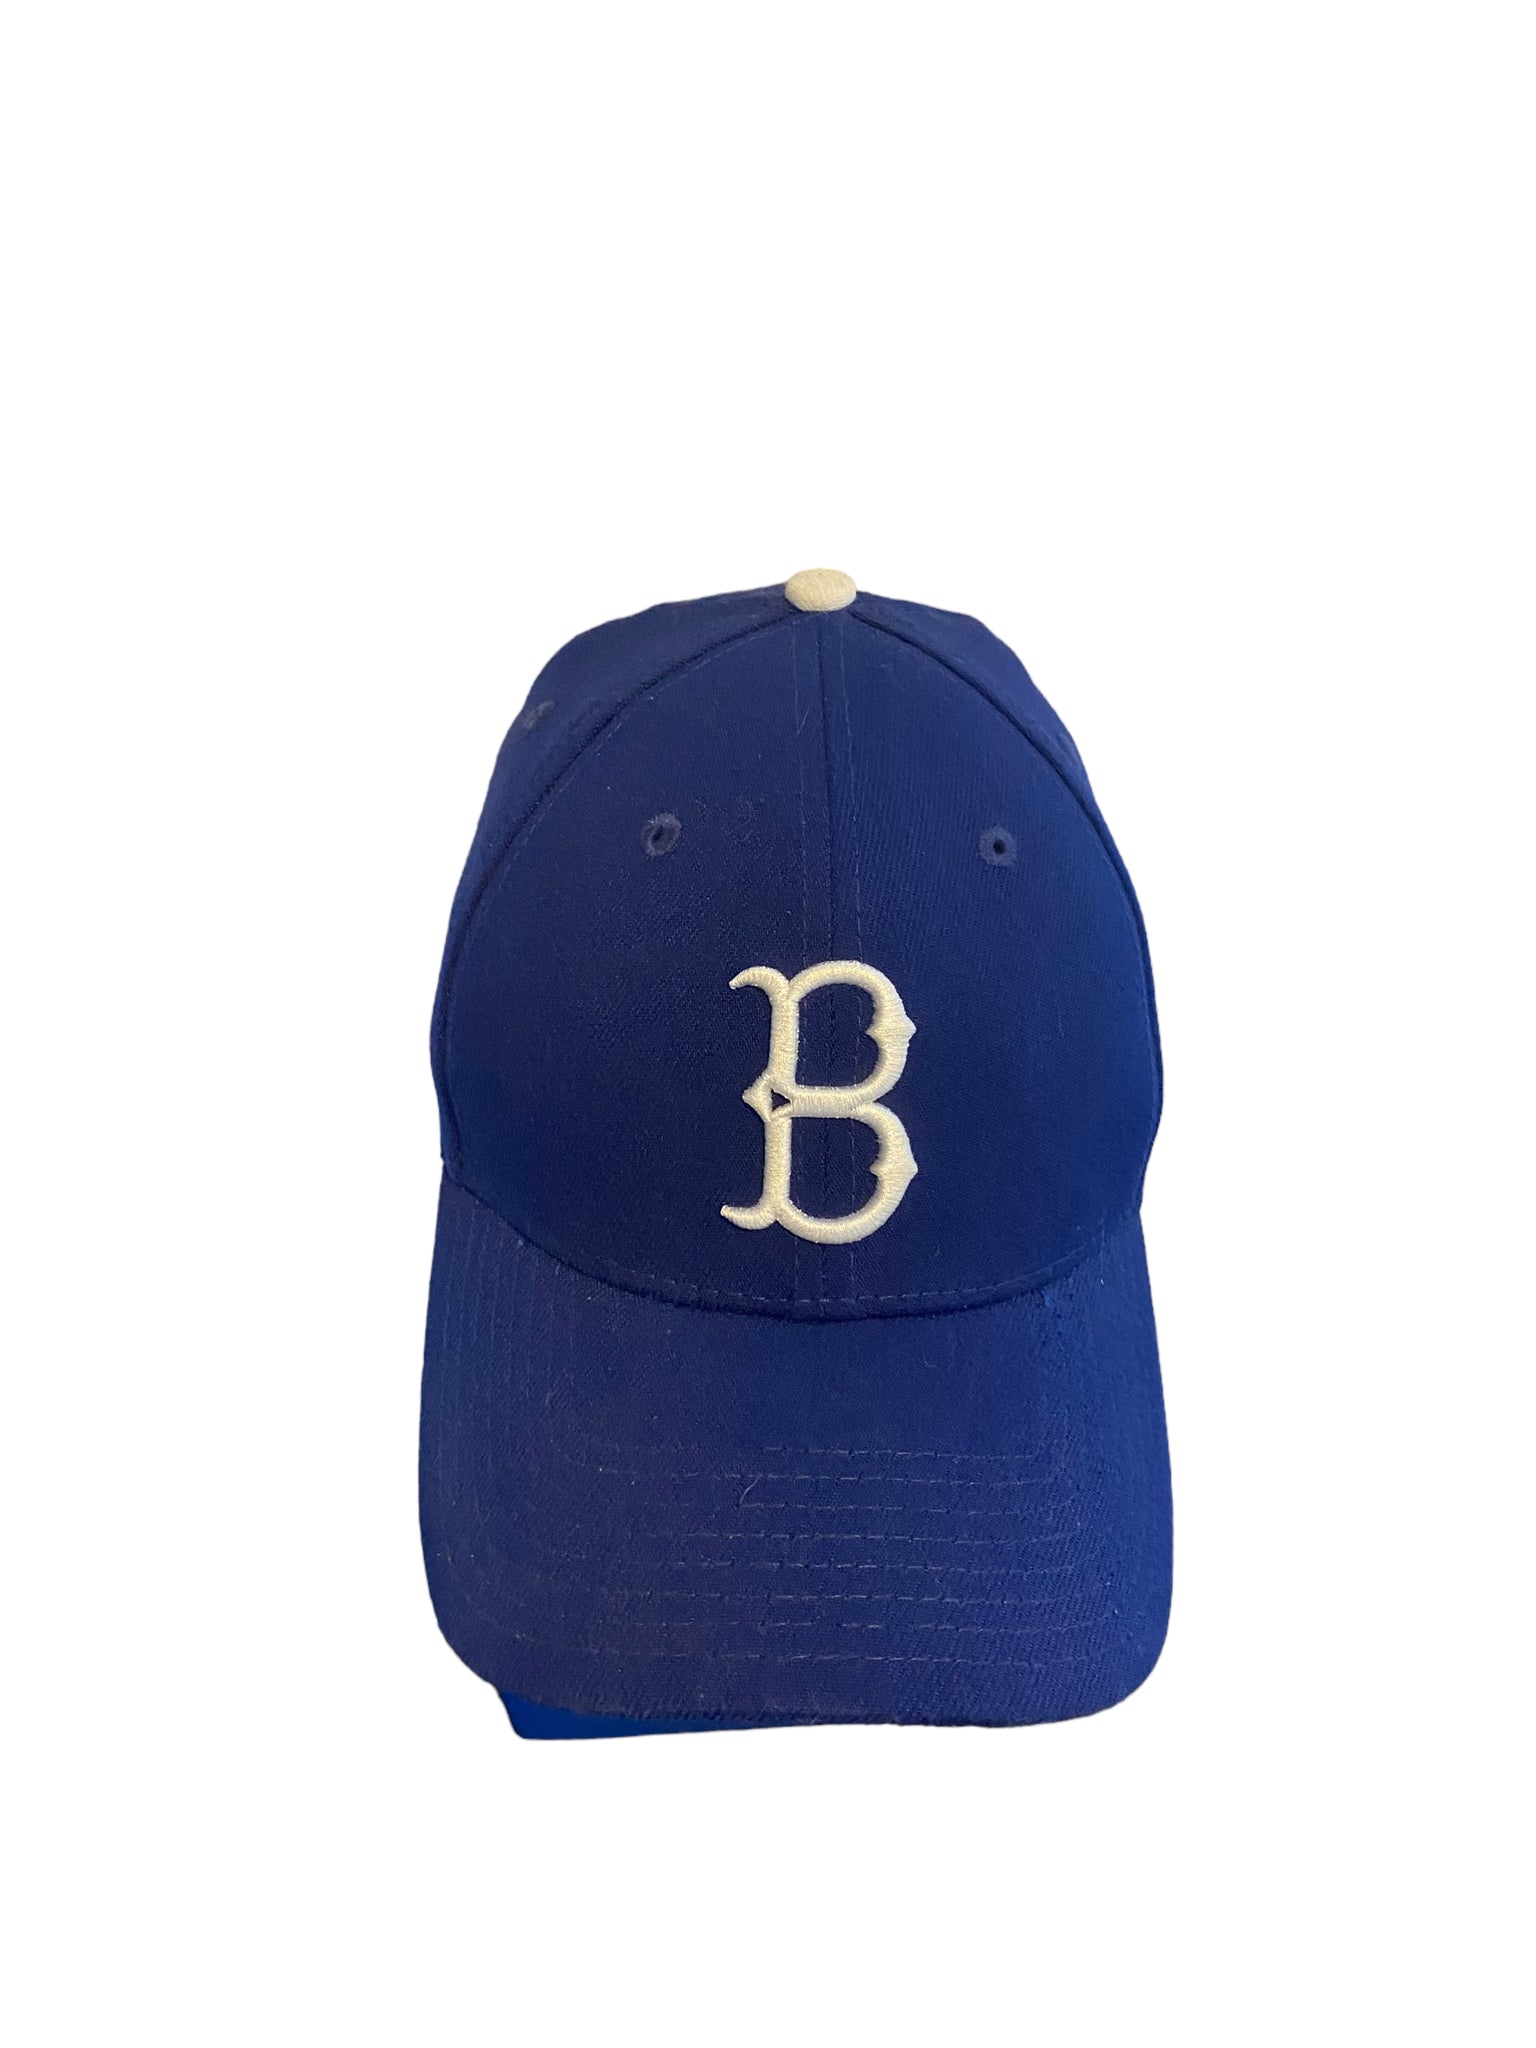 New Era Brooklyn Dodgers Royal Blue Cooperstown Collection Fitted Hat M/L - Altezahan